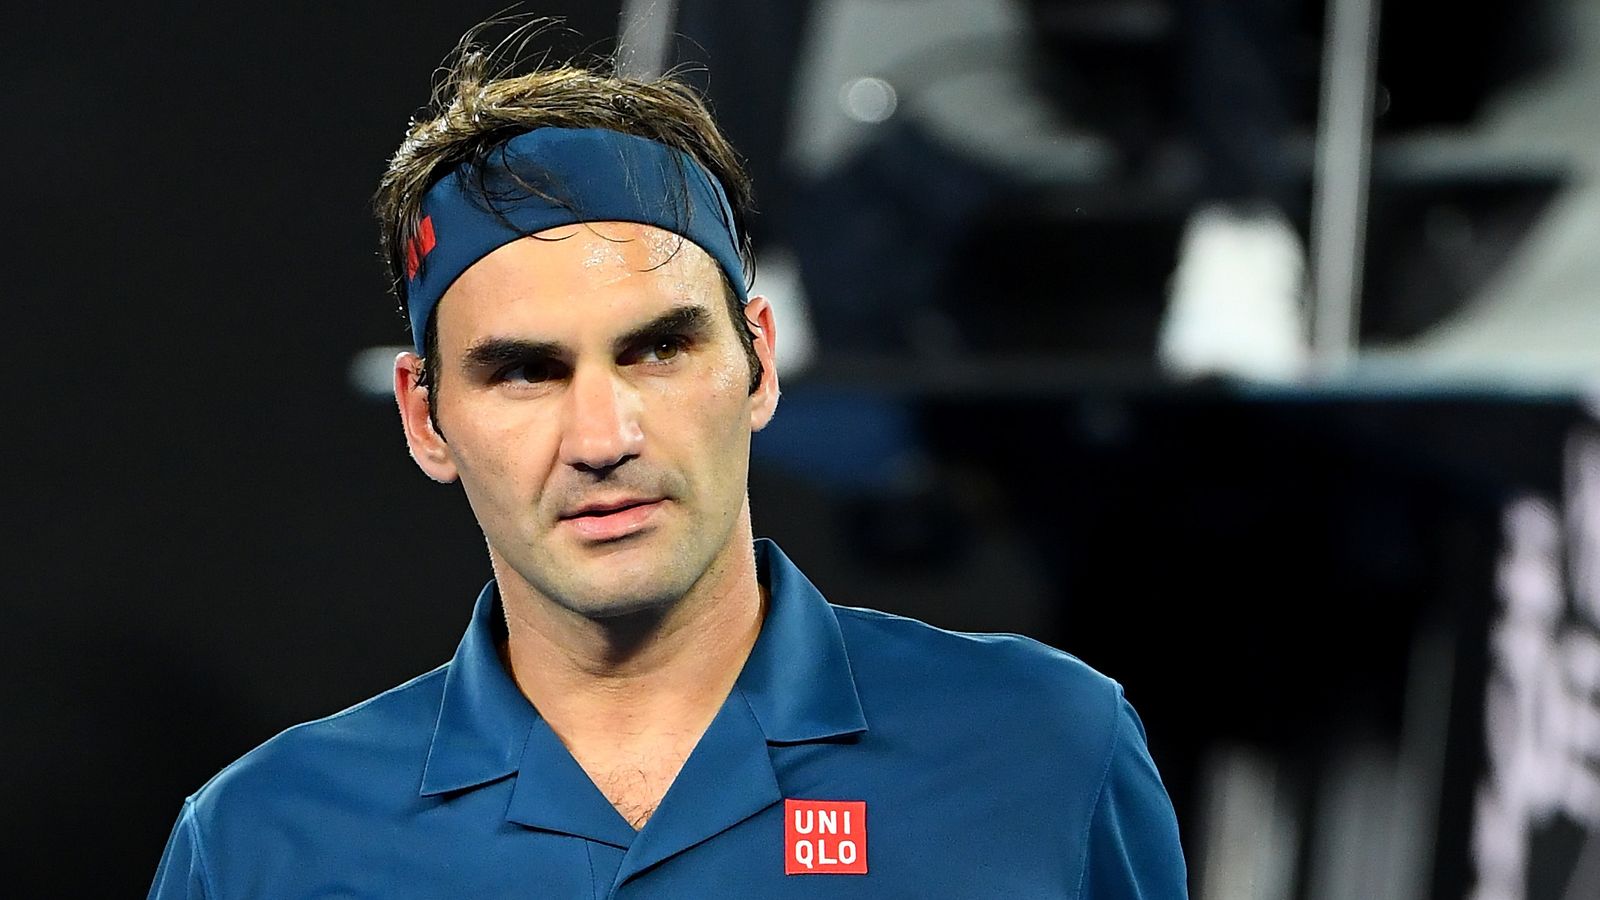 Roger Federer will play on clay at this year's Madrid Open | Tennis News | Sky Sports1600 x 900